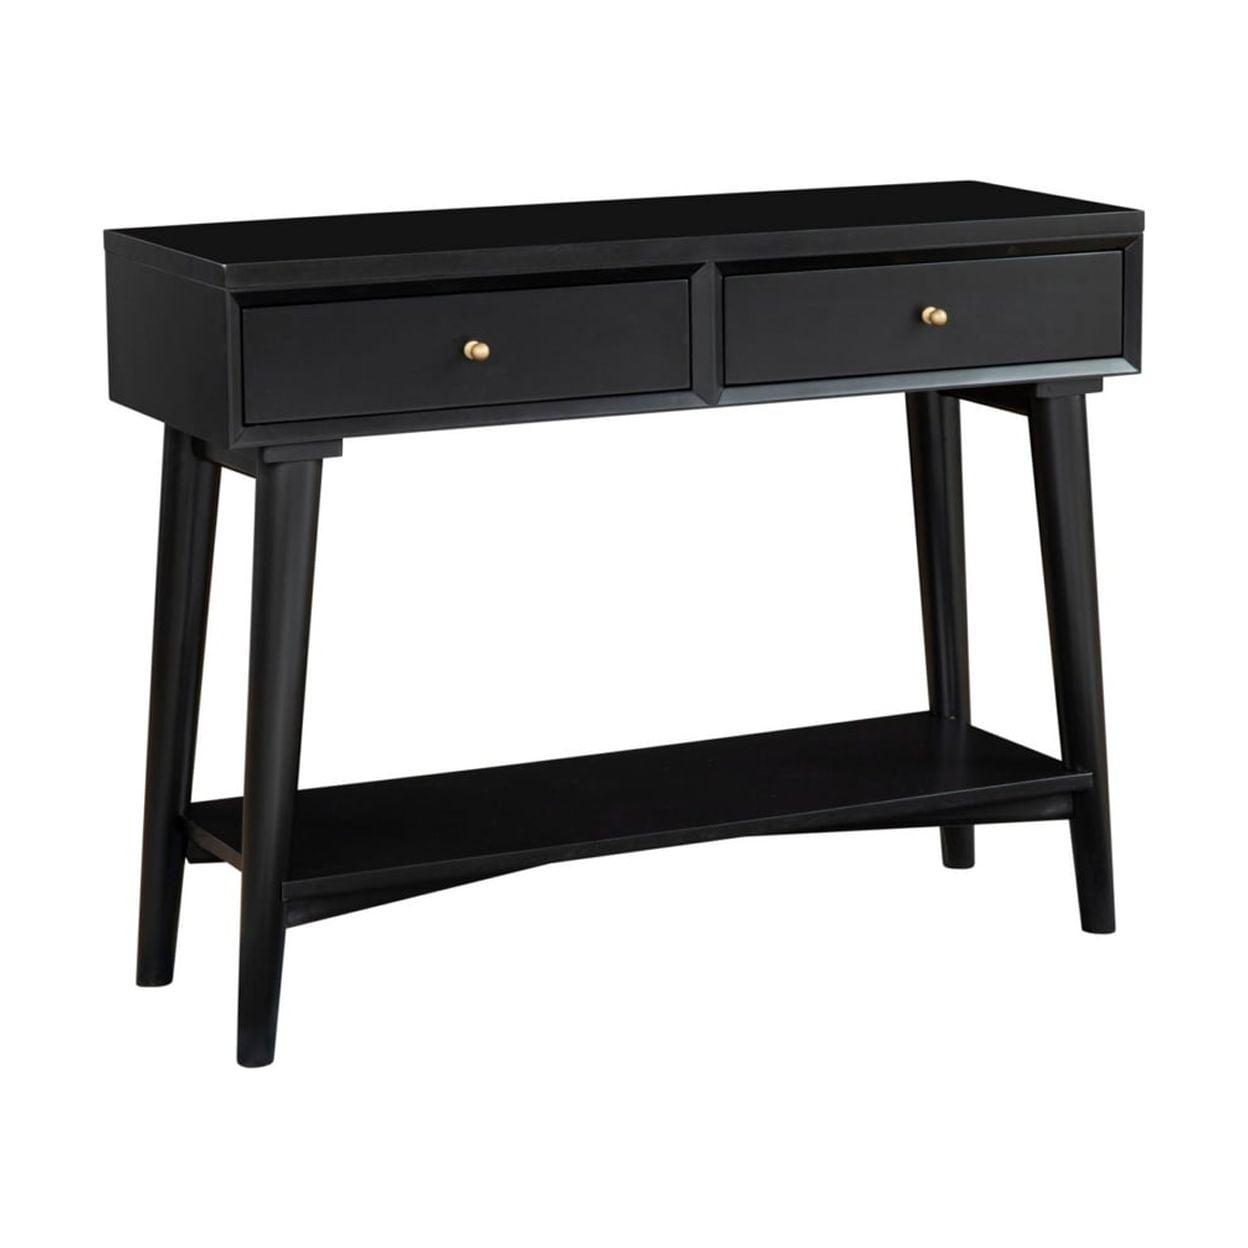 Charismatic Black Mahogany Console Table with Mirrored Storage